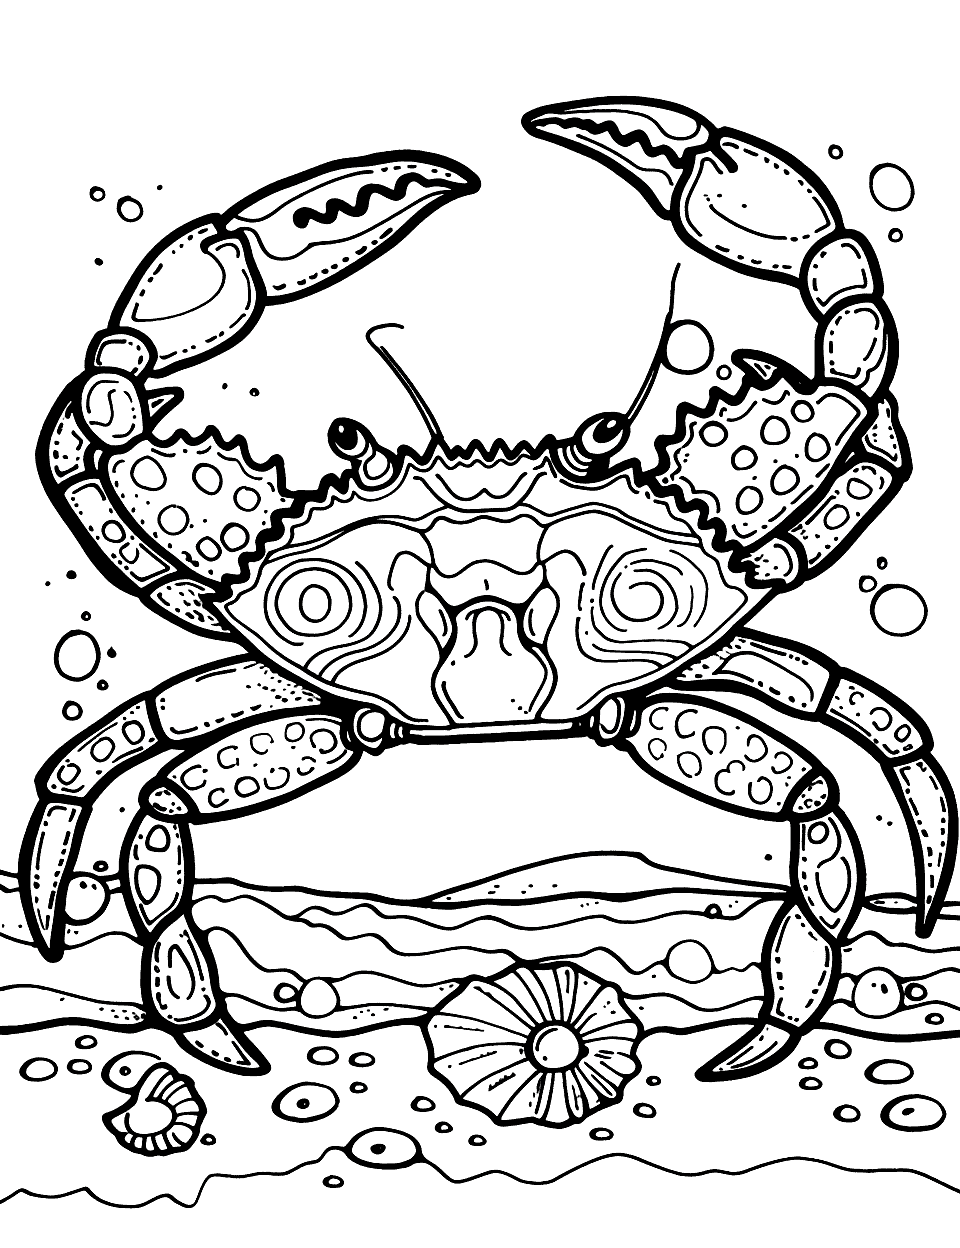 Crab with a Shiny Shell Coloring Page - A shiny, detailed crab with an intricately patterned shell, walking on the beach.